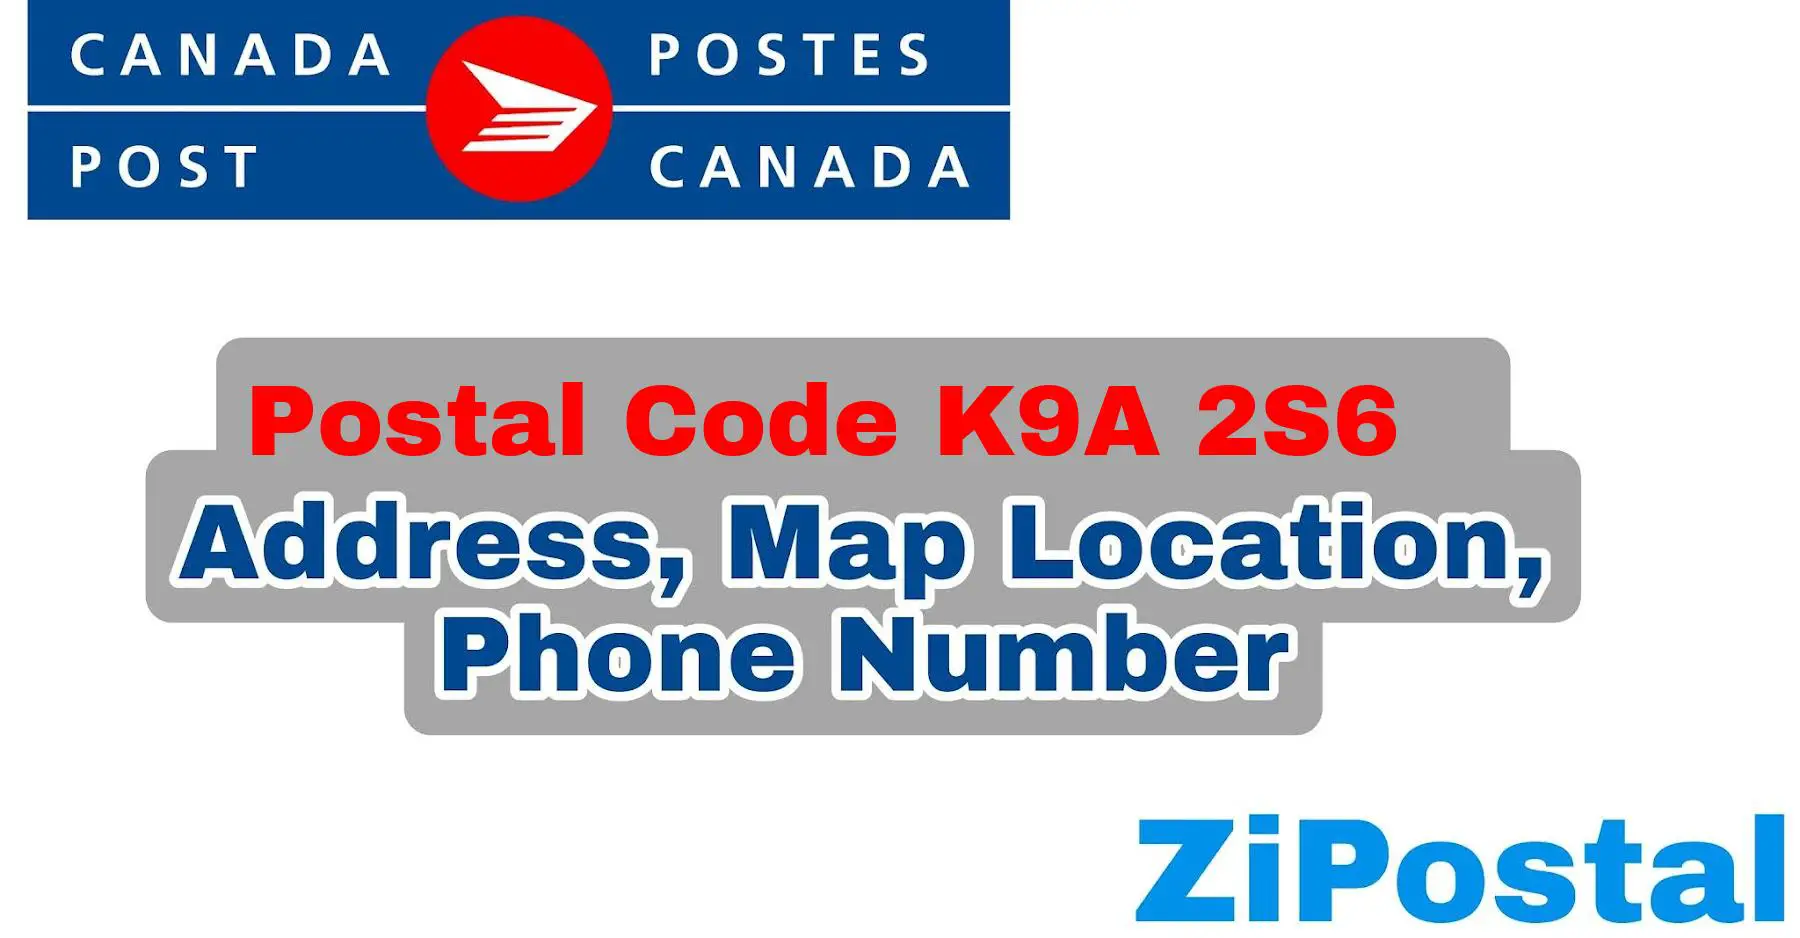 Postal Code K9A 2S6 Address Map Location and Phone Number